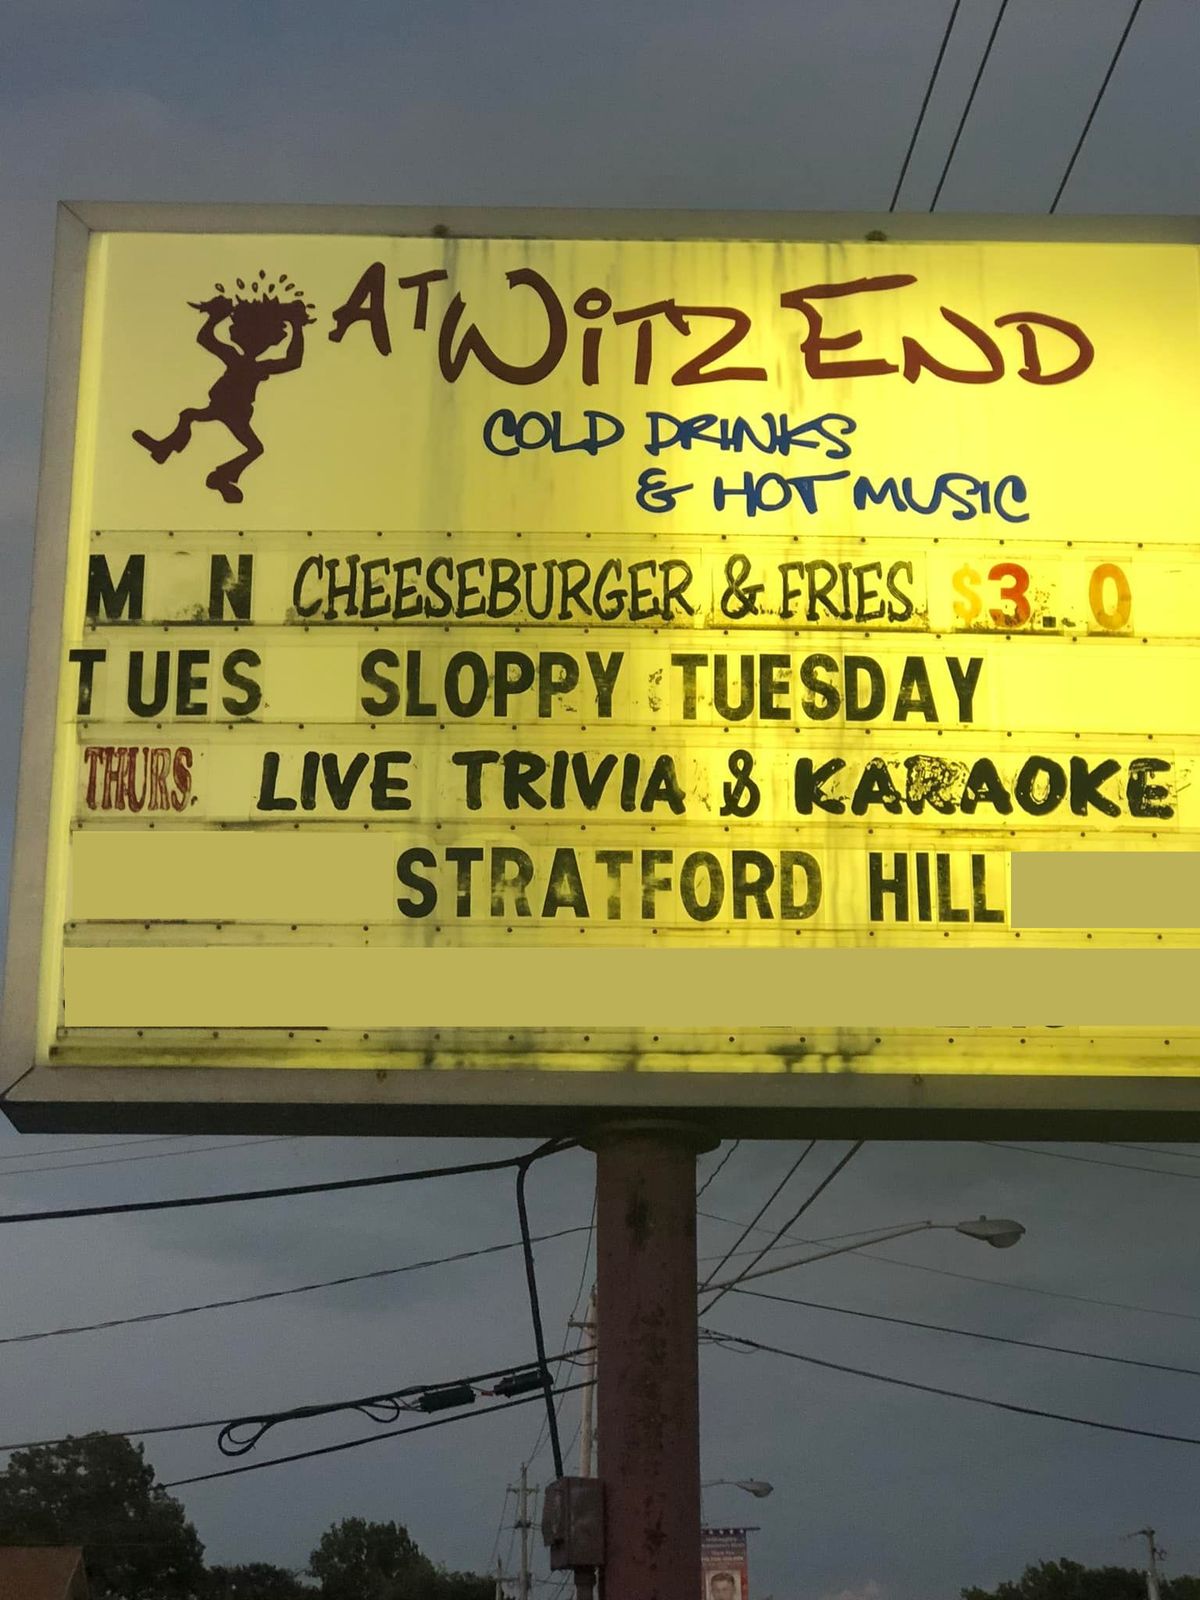 Stratford Hill "At Witz End"